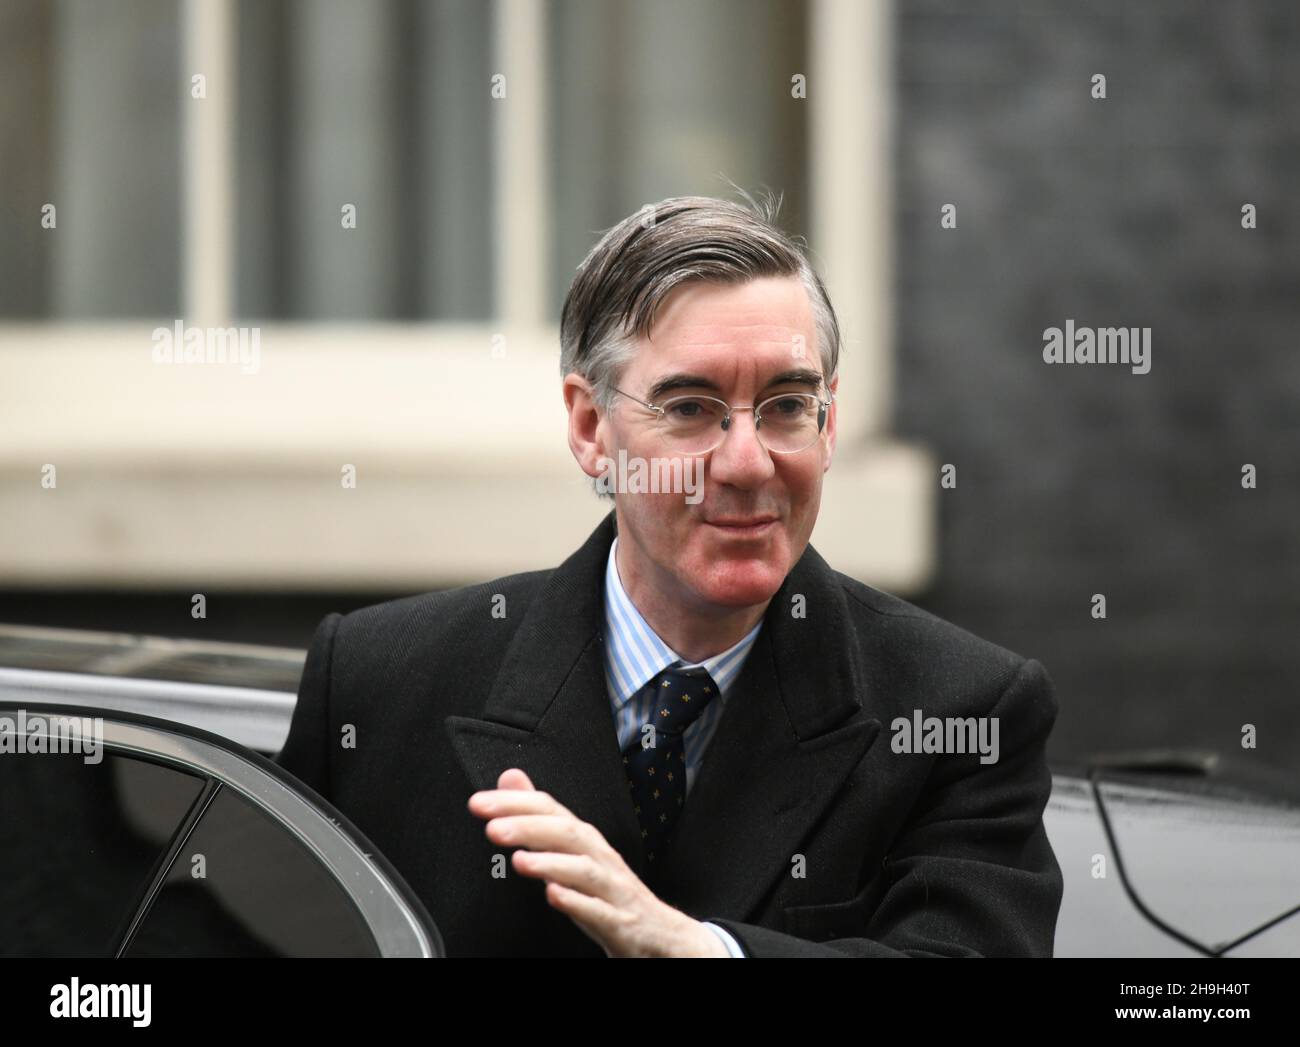 Downing Street, London, Großbritannien. 7. Dezember 2021. Jacob Rees-Mogg MP, Lord President of the Council, Leader of the Commons in Downing Street für wöchentliche Kabinettssitzung. Quelle: Malcolm Park/Alamy Live News. Stockfoto